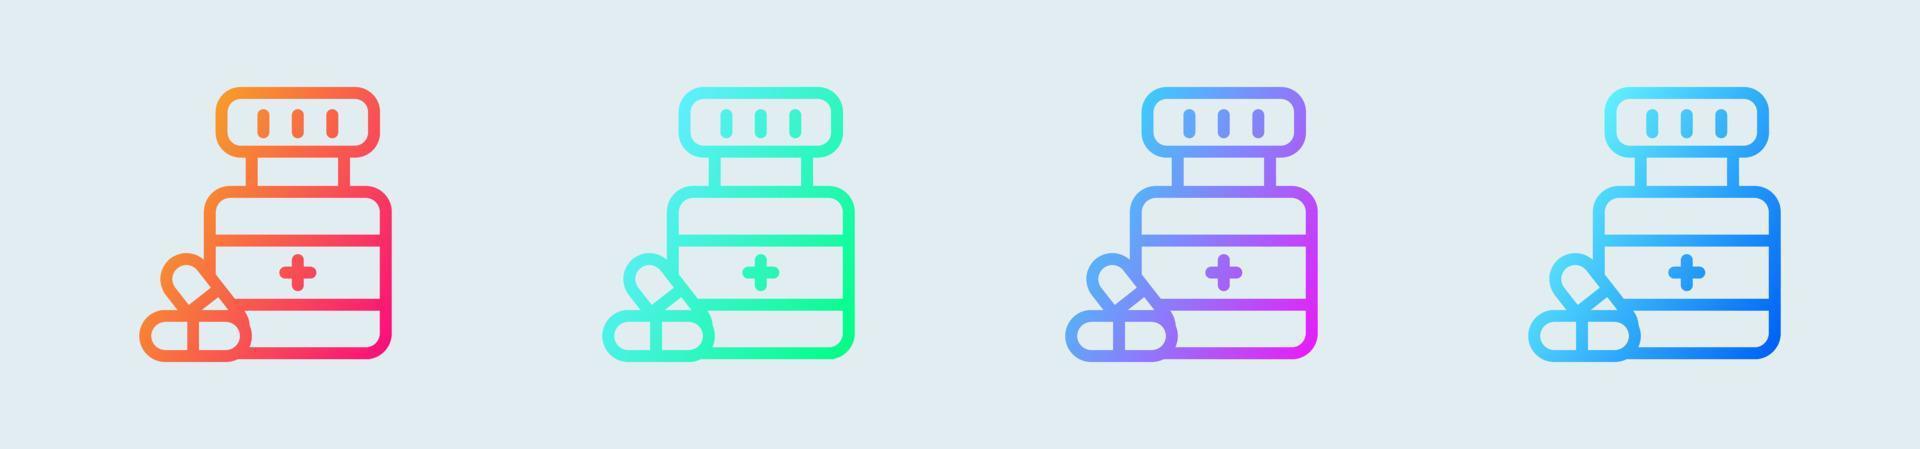 Medicine bottle line icon in gradient colors. Pharmacy signs vector illustration.